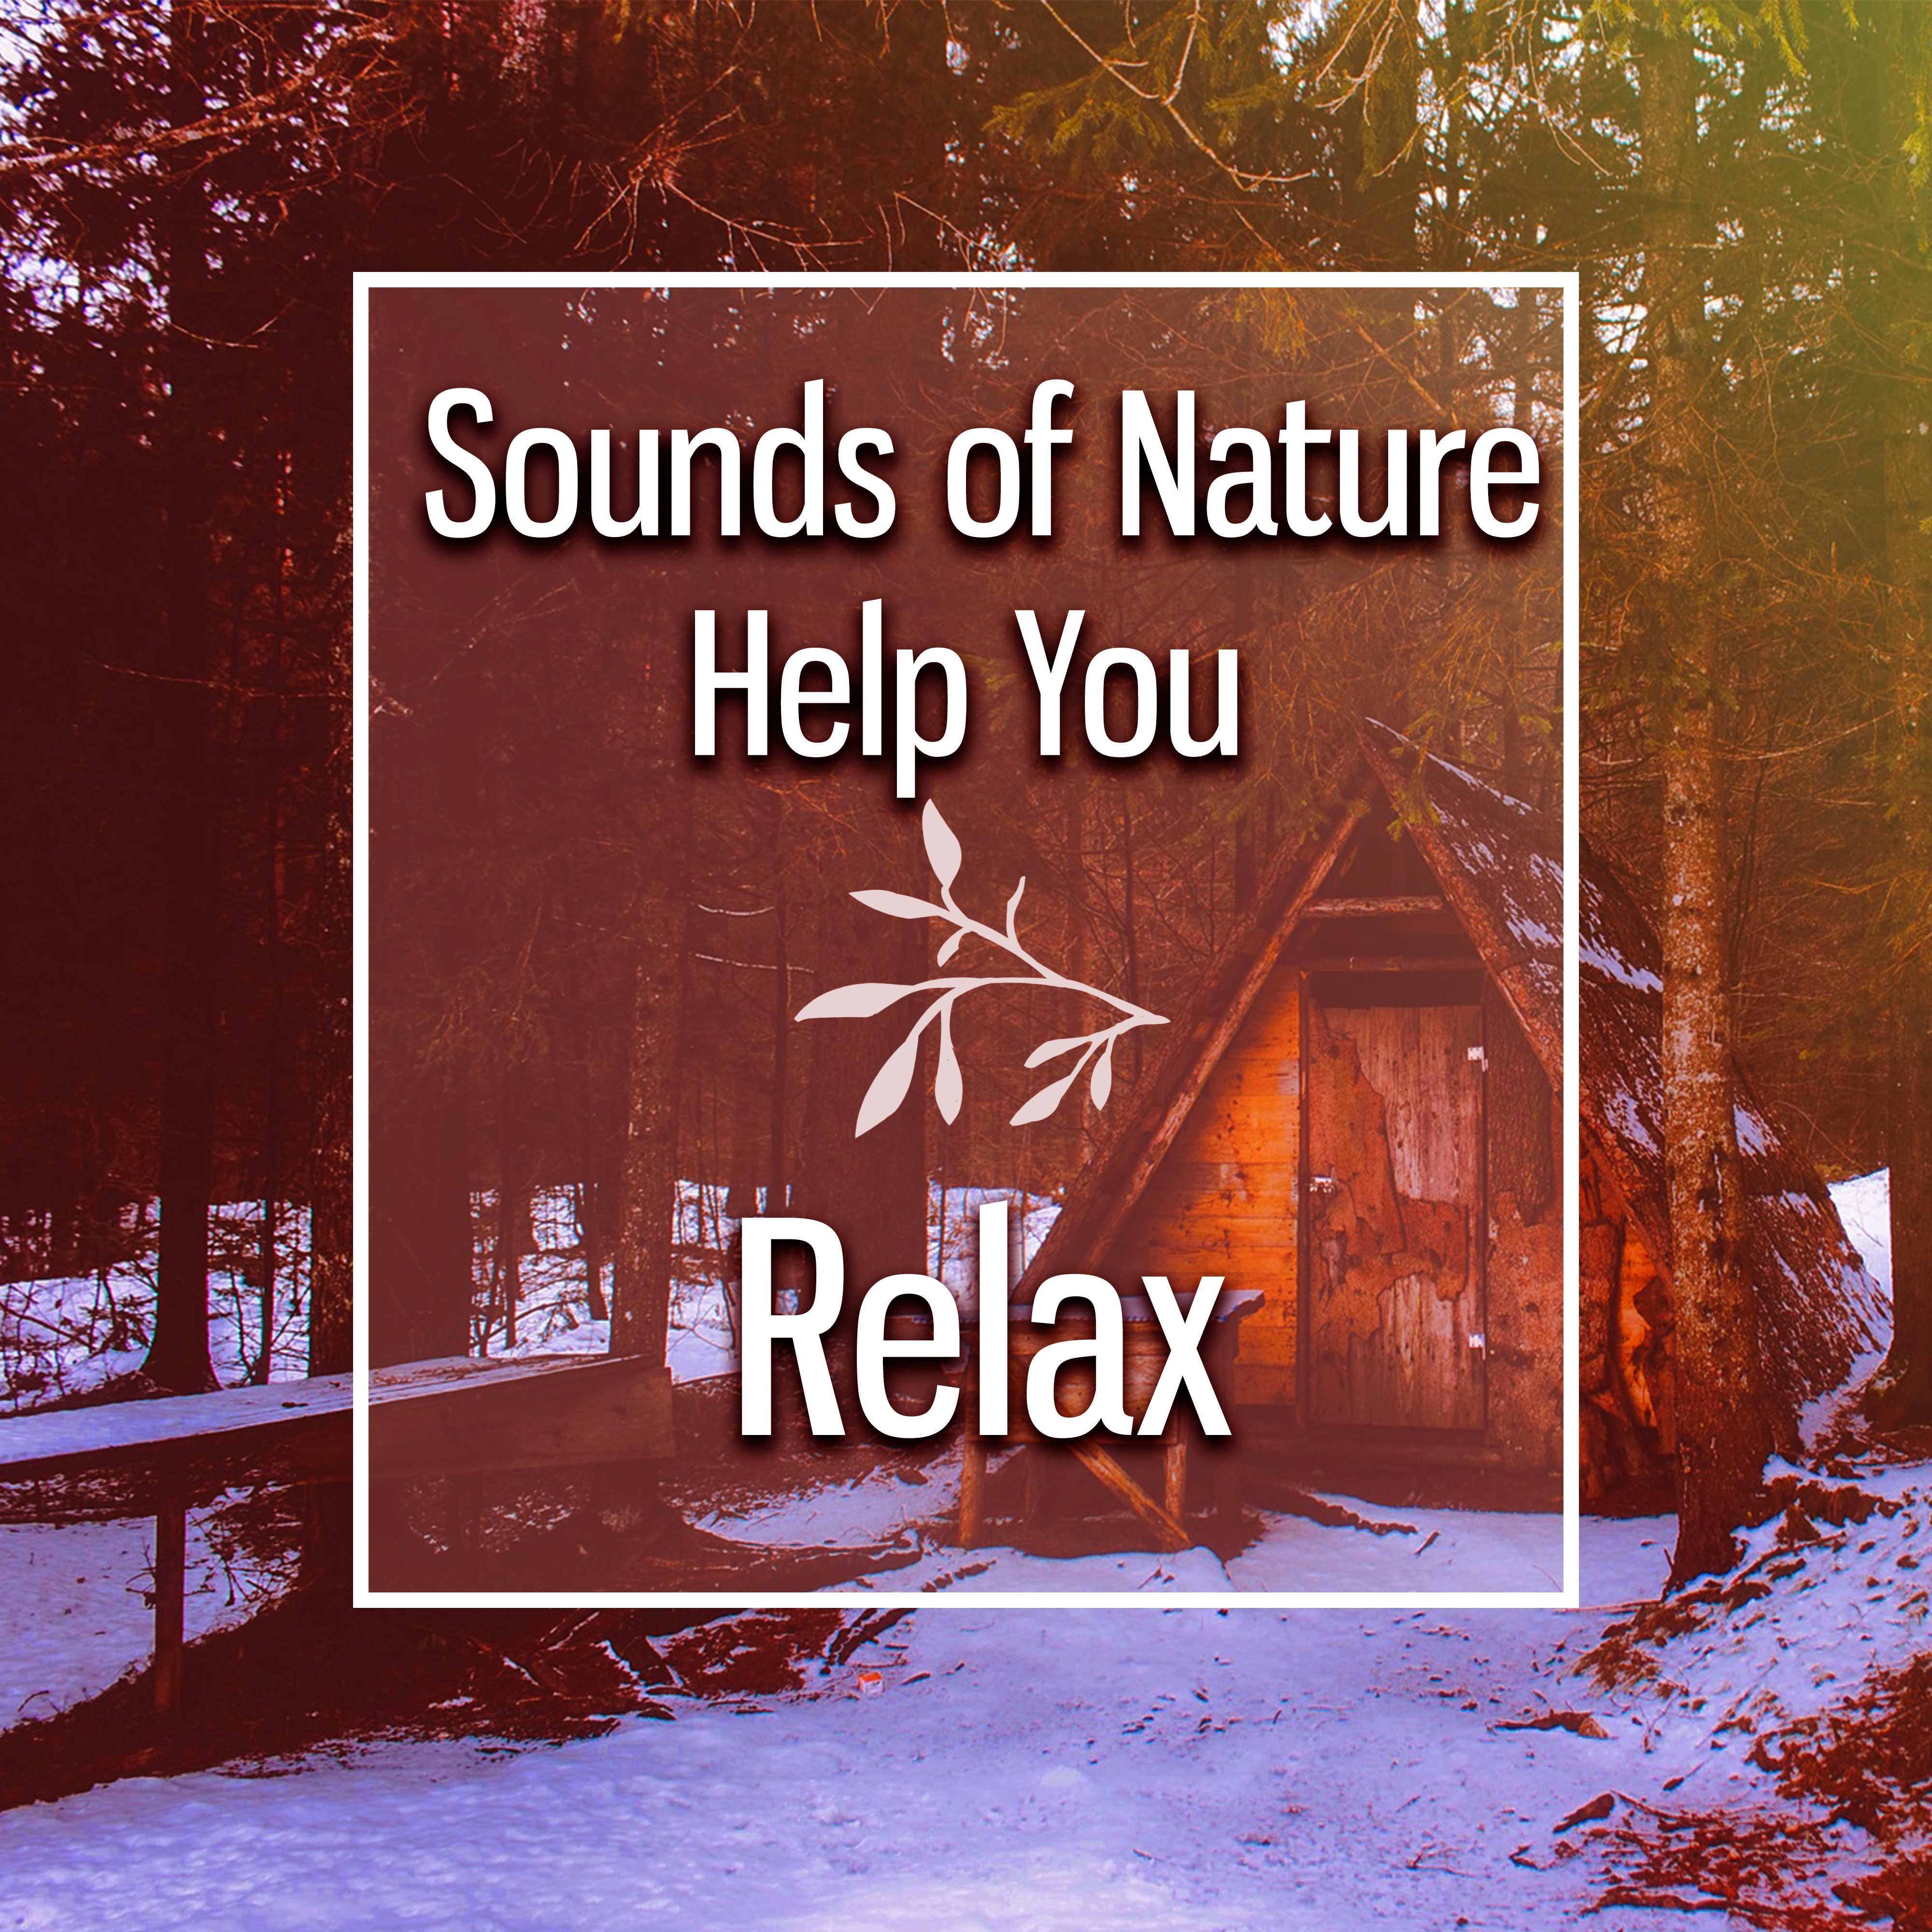 Sounds of Nature Help You Relax  Peaceful Music, Singing Birds, Healing Water, Pure Mind, Rest, Calmness